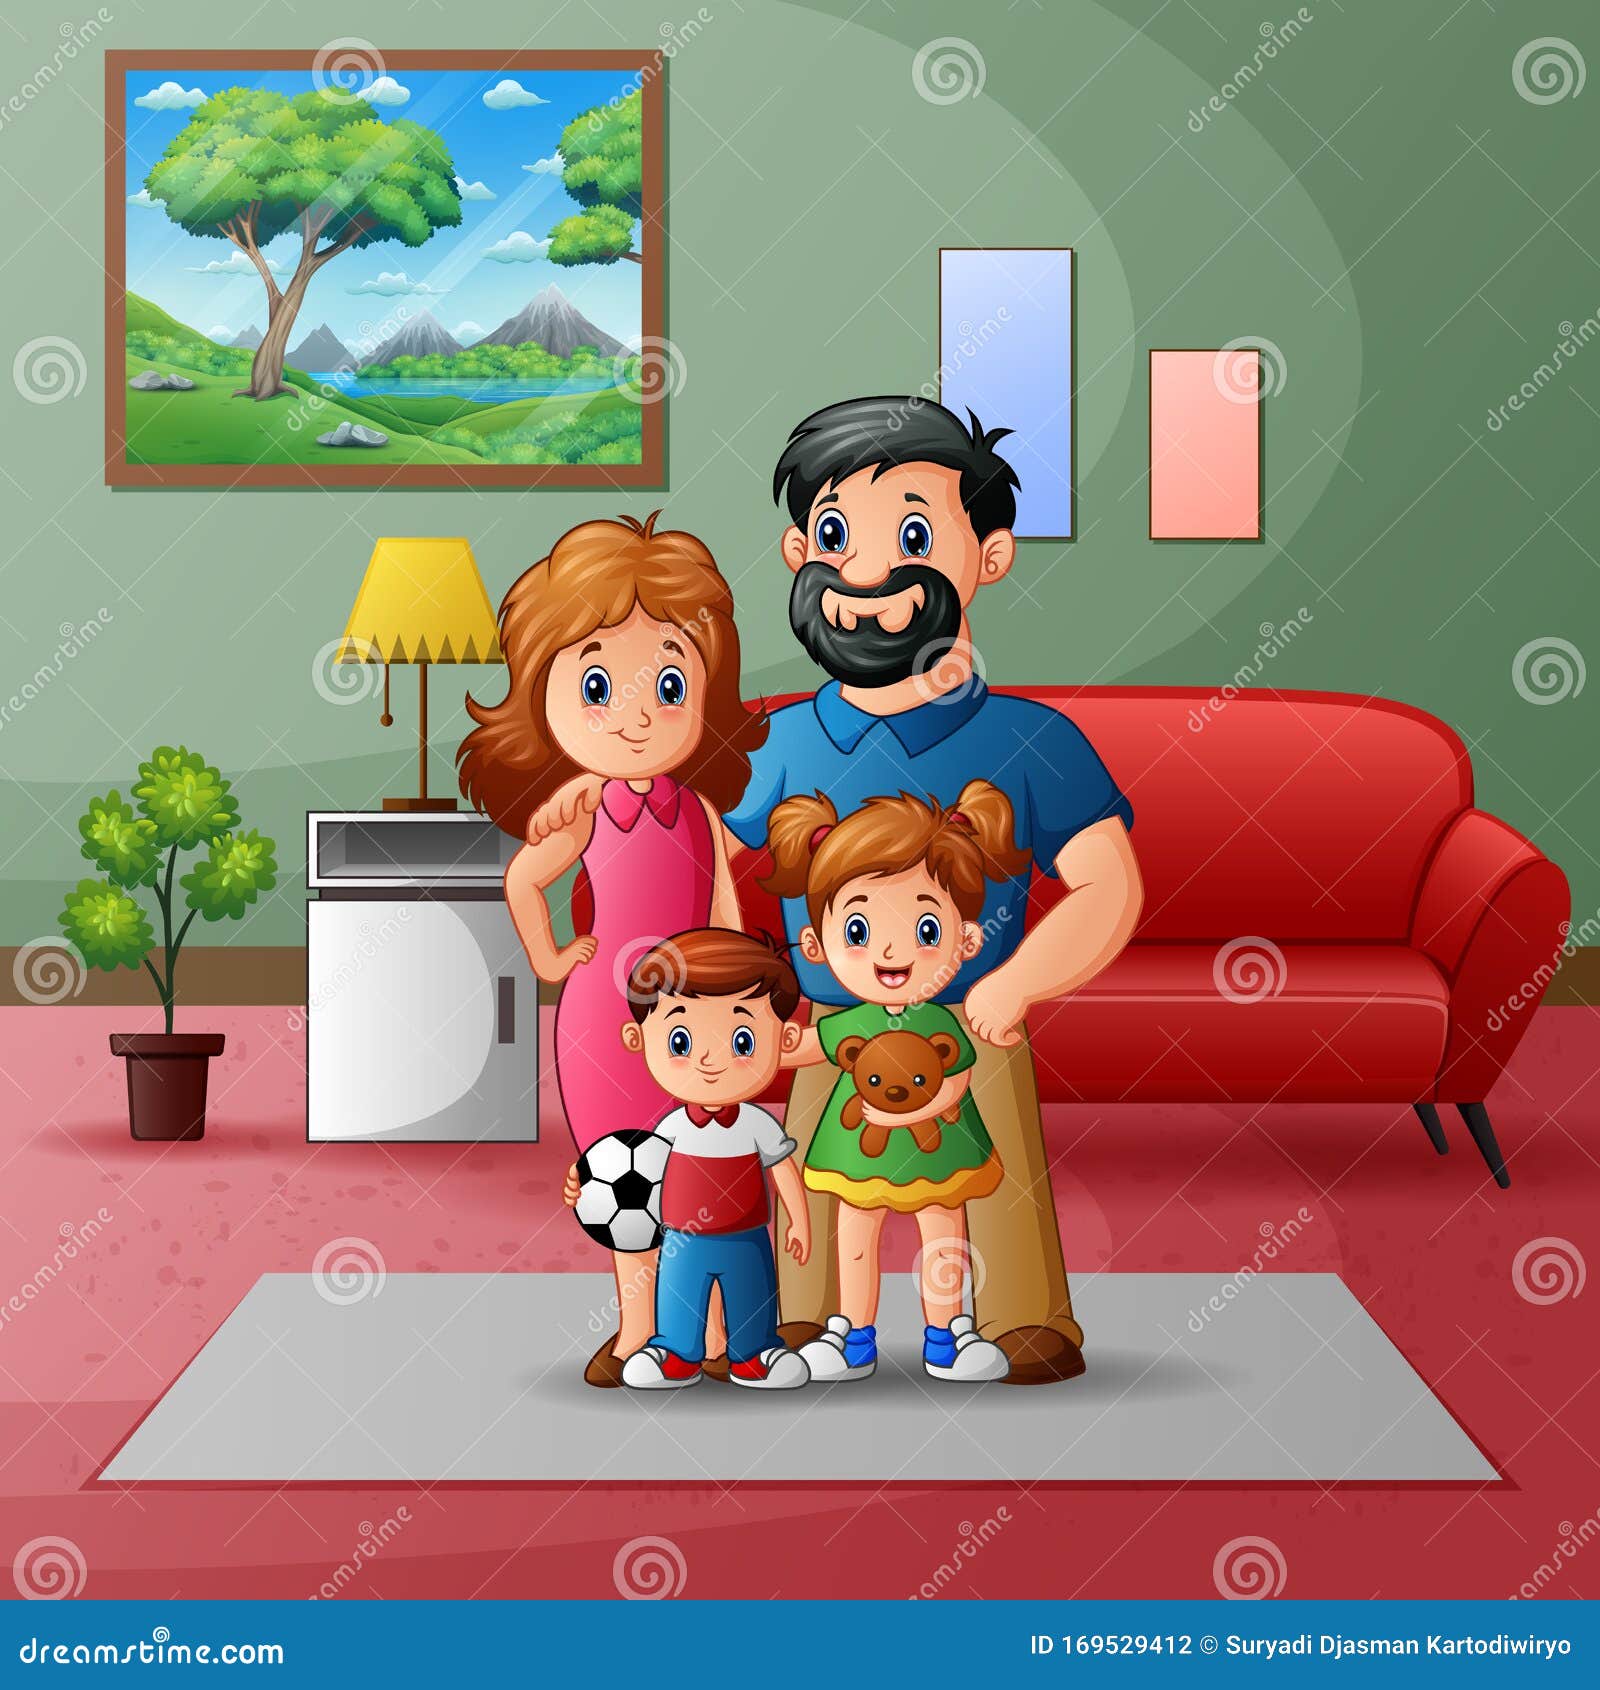 Illustration of a Family Inside the House Stock Vector - Illustration of  concept, comfortable: 169529412